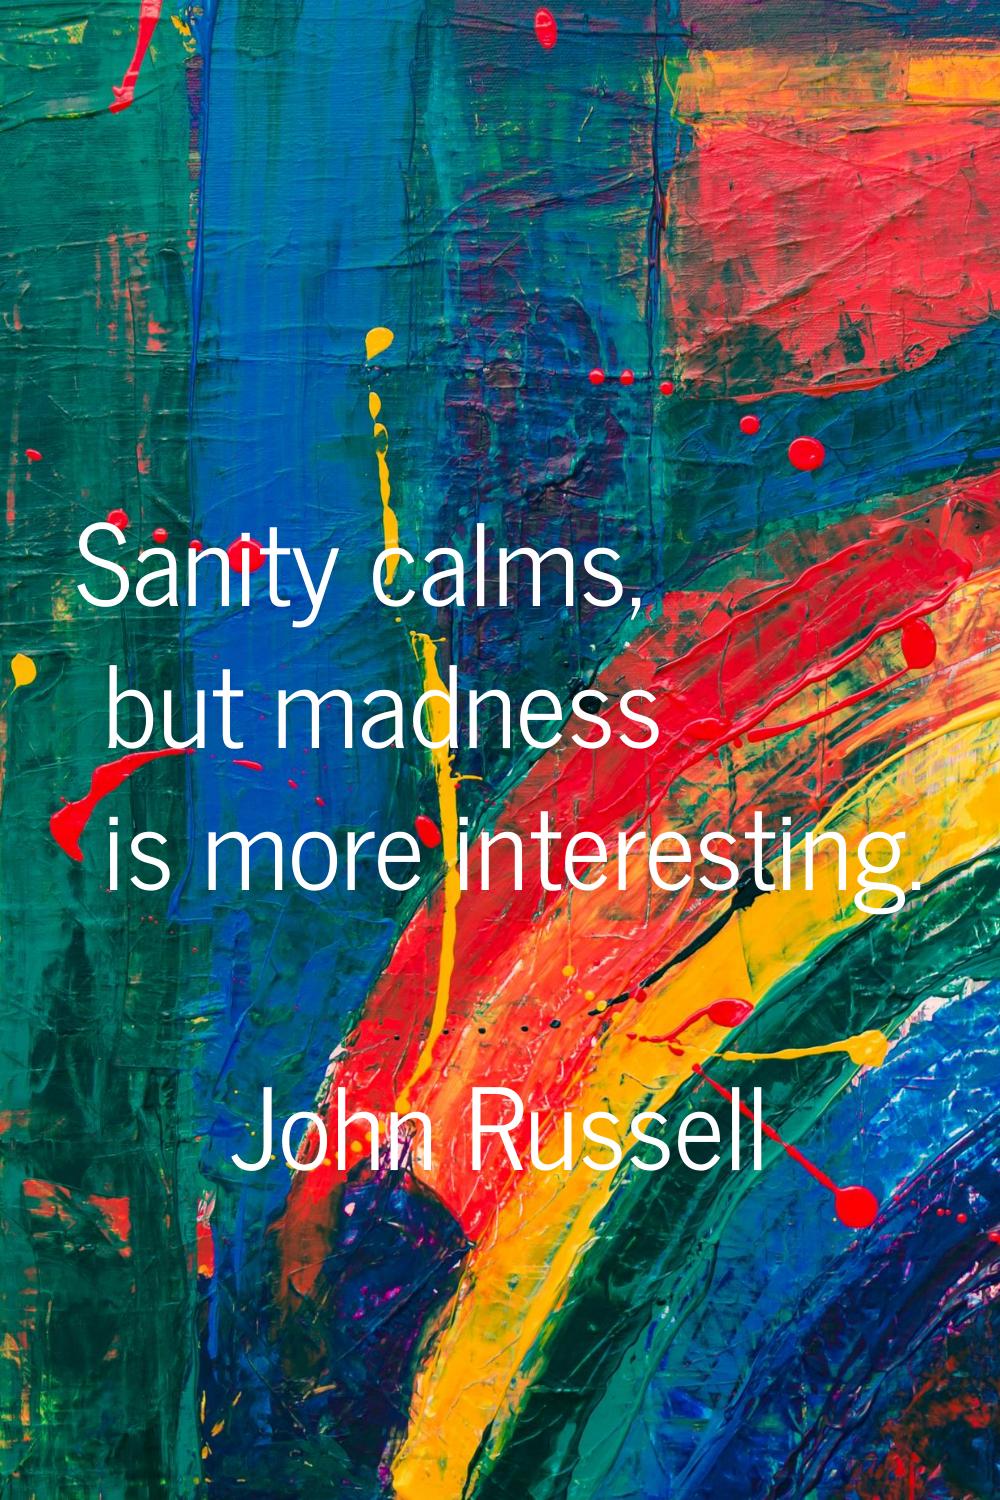 Sanity calms, but madness is more interesting.